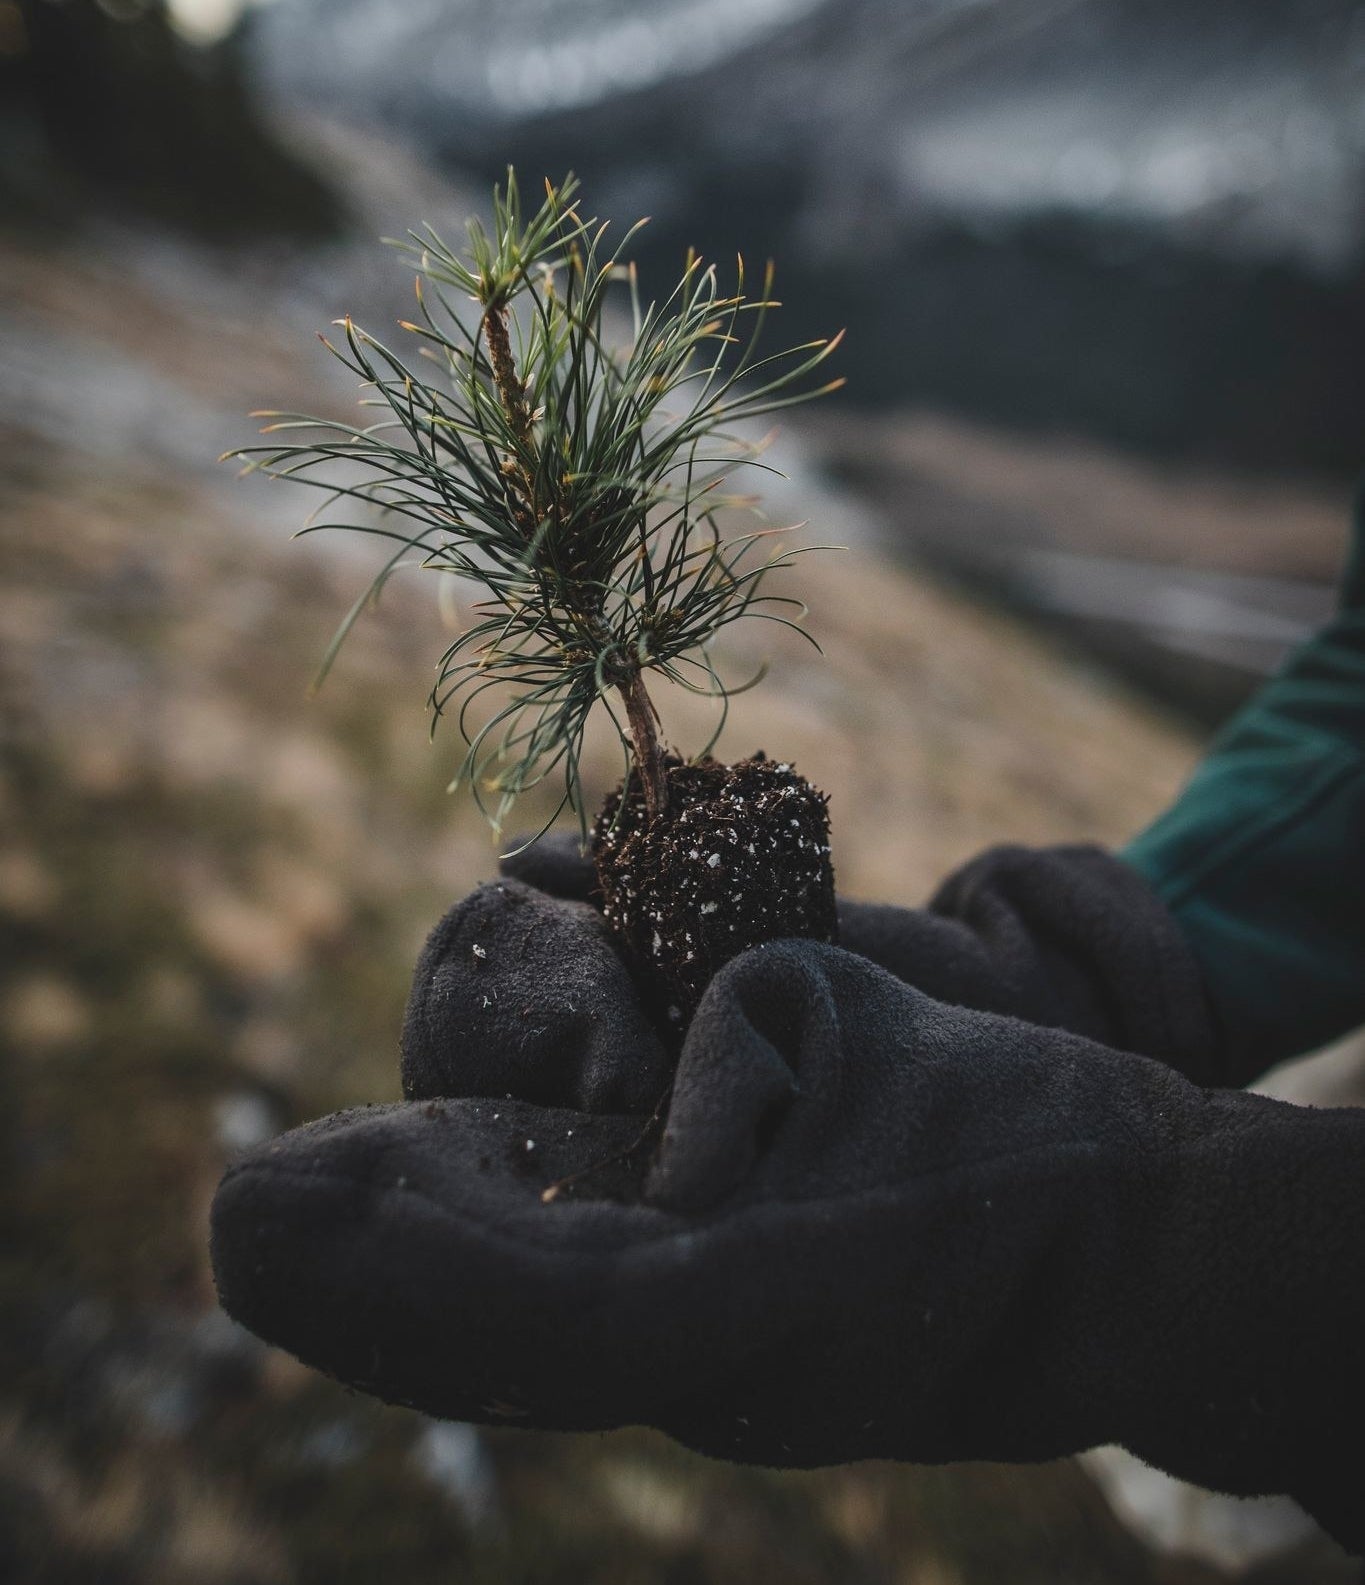 A person holding a baby tree in their mittens